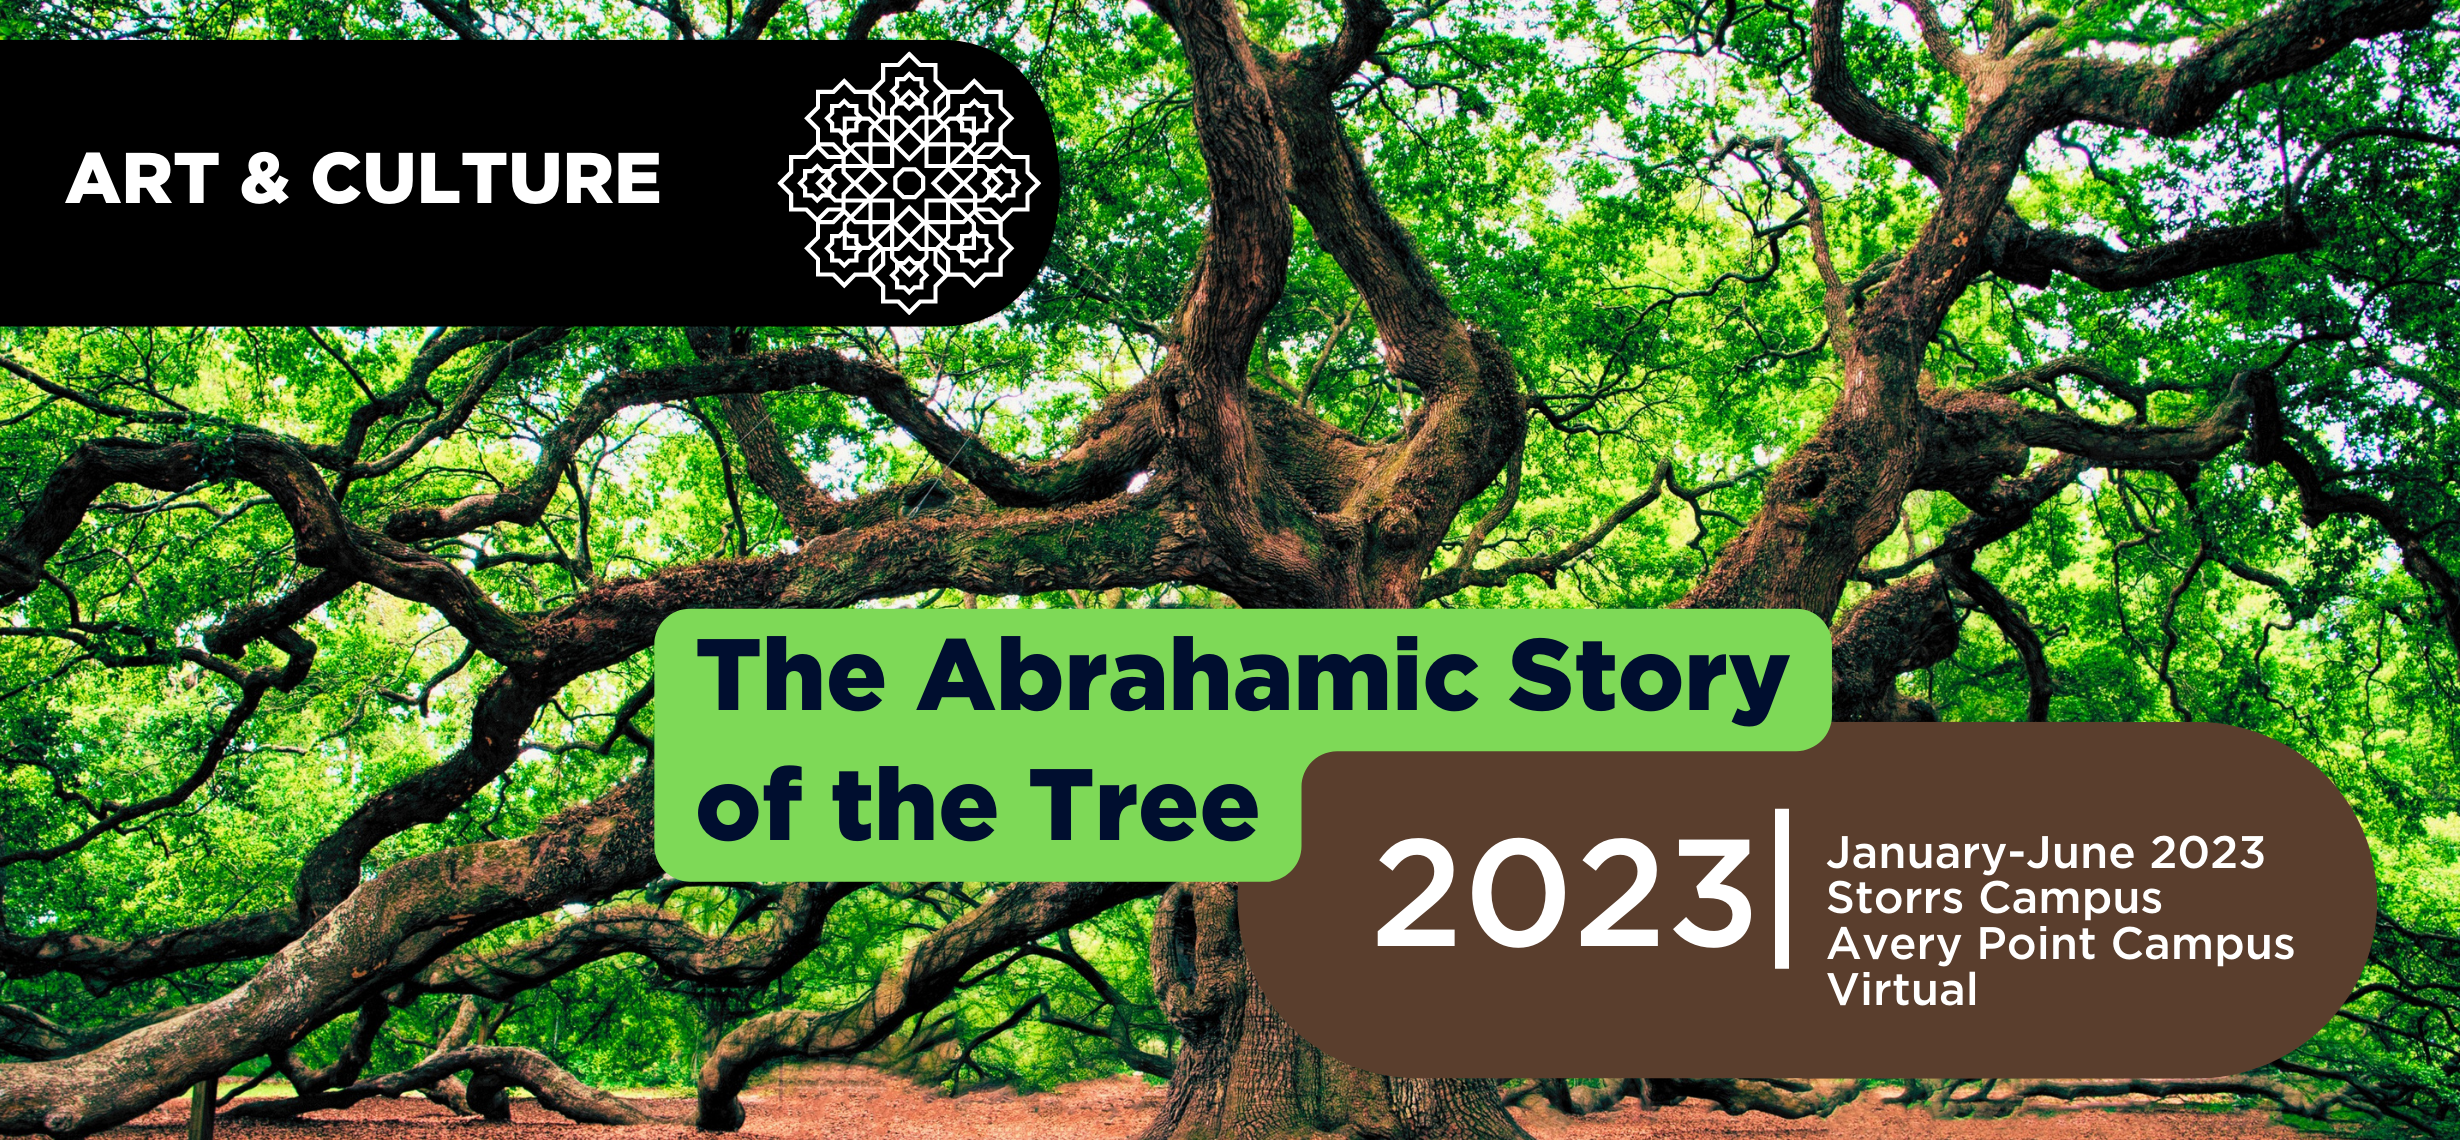 2023 The Abrahamic Story of the Tree: The Tree of Life